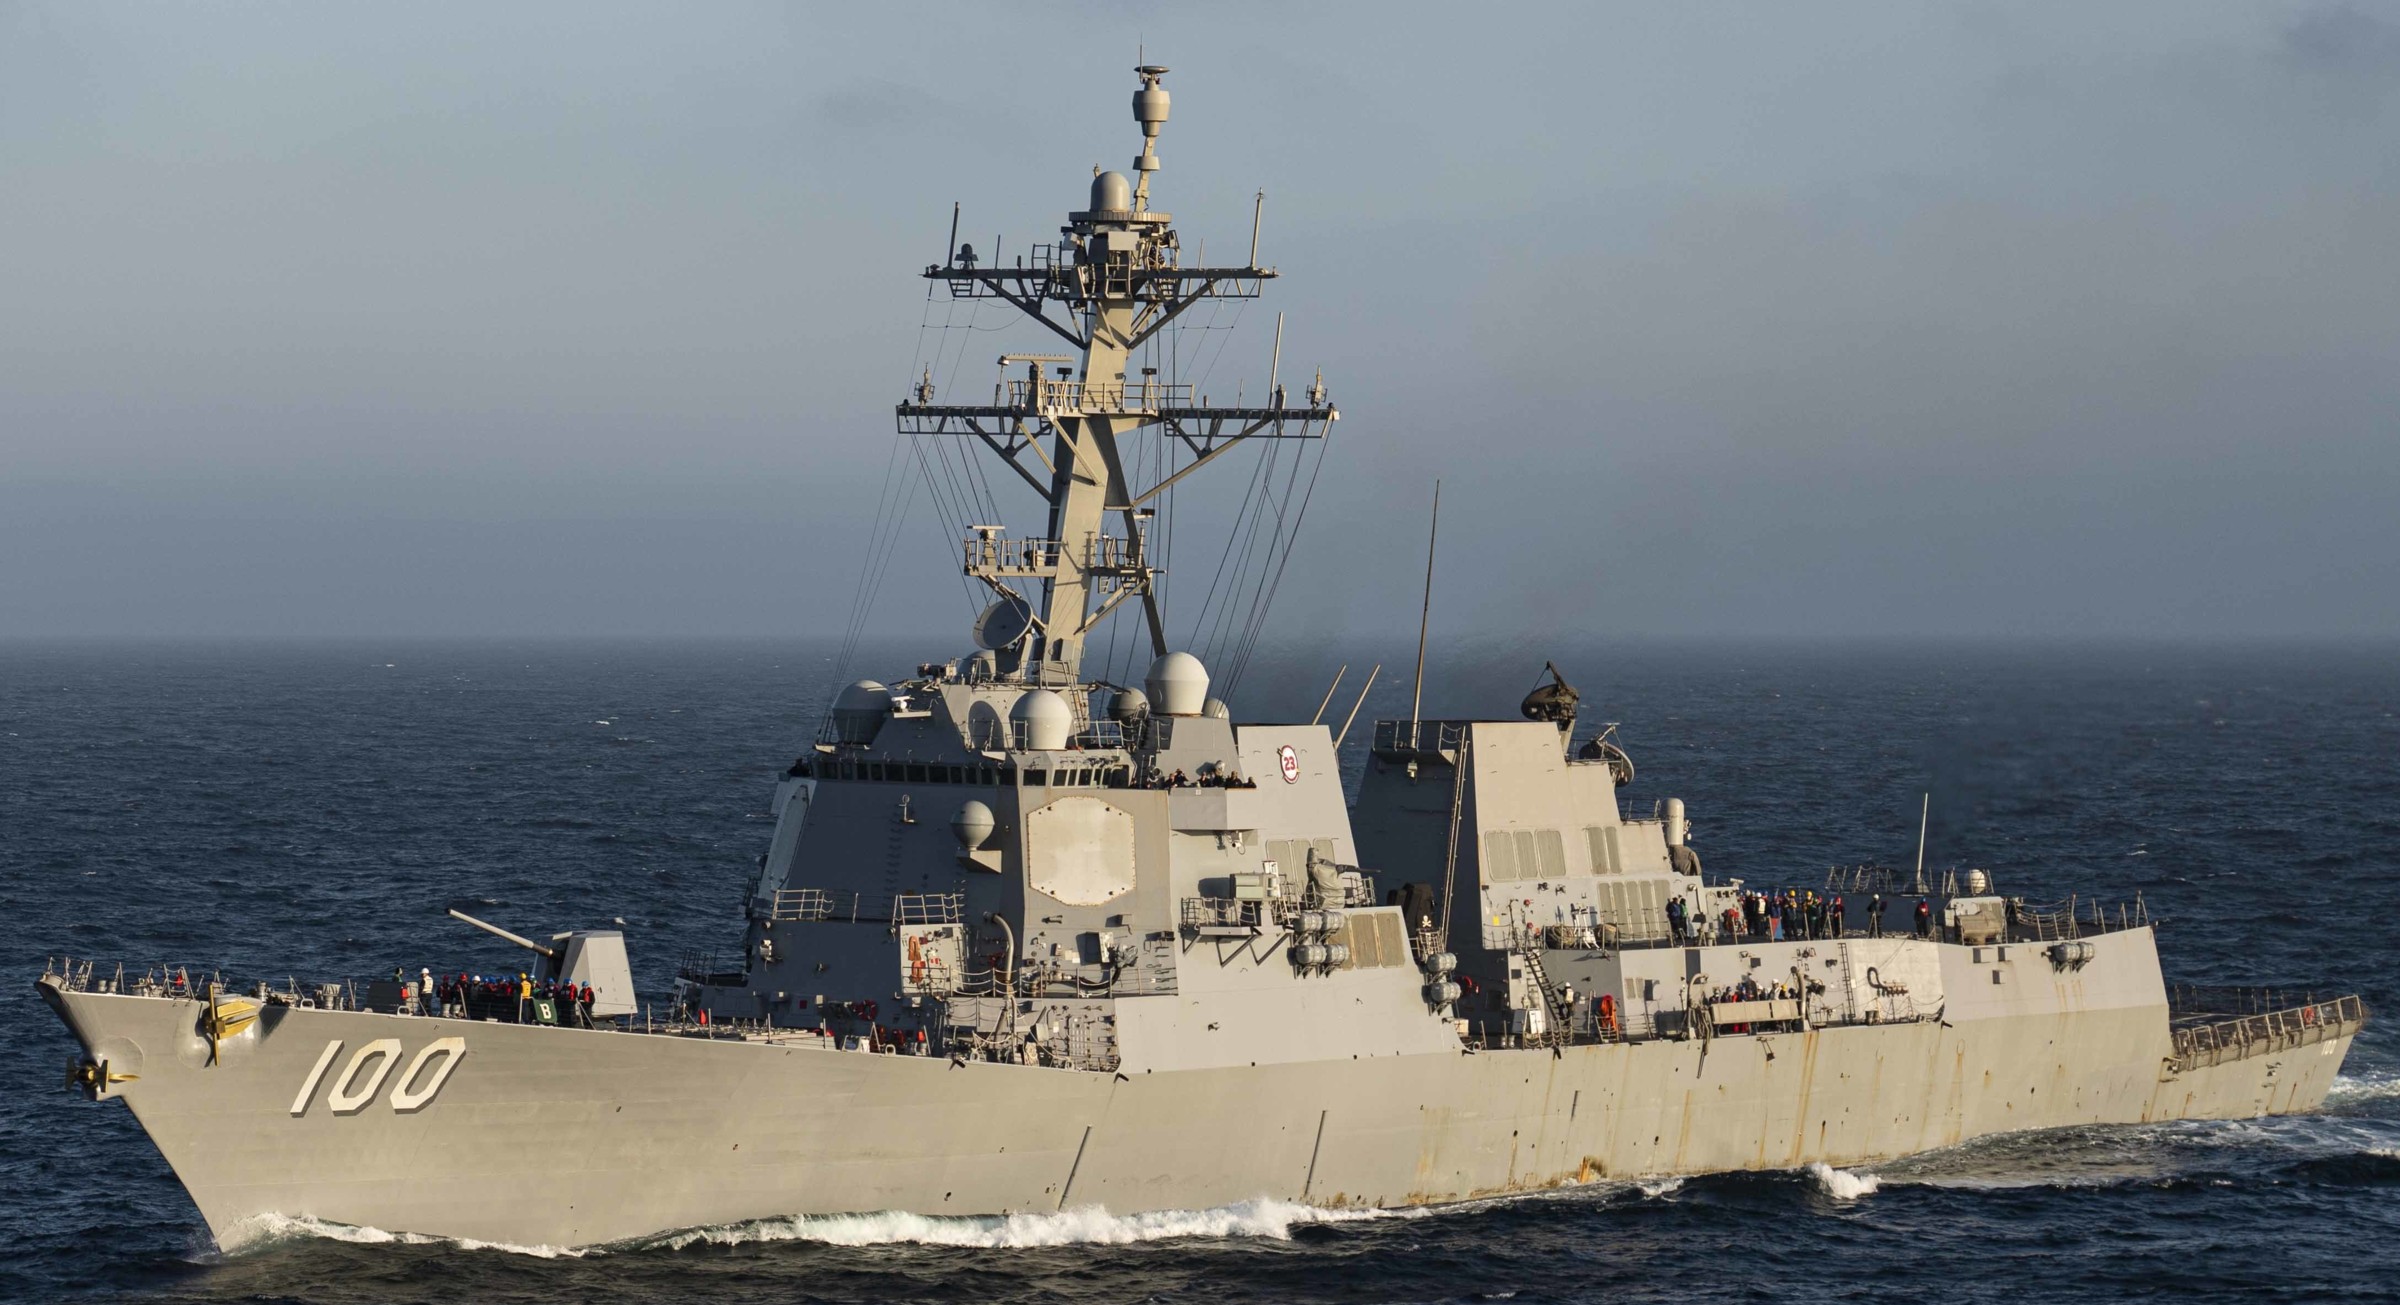 ddg-100 uss kidd arleigh burke class guided missile destroyer aegis us navy ingalls 61x